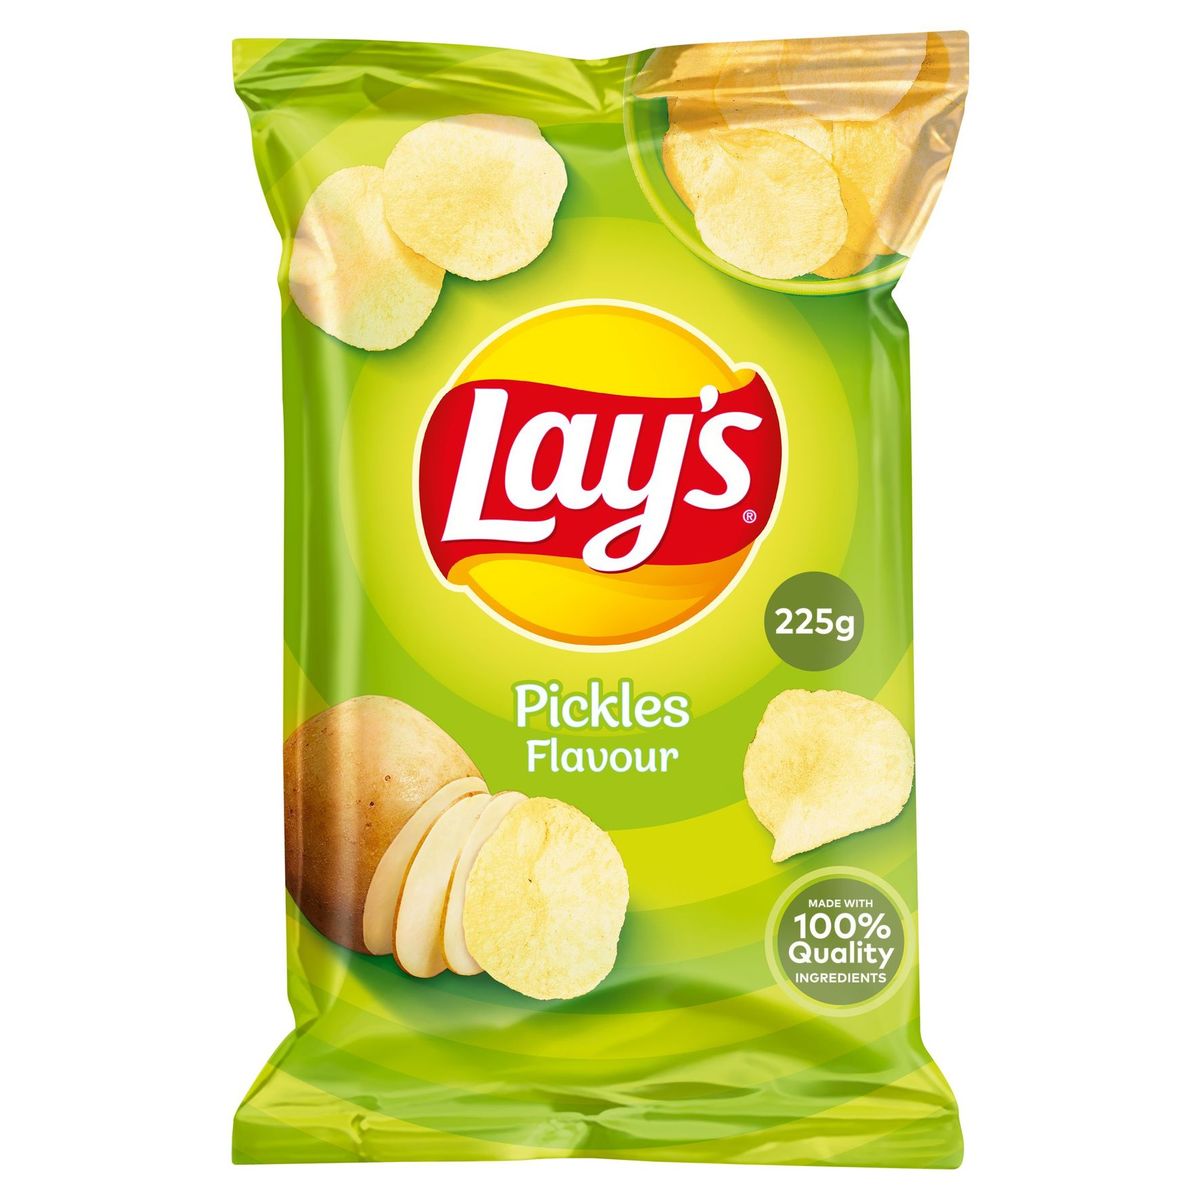 Lay's Aardappelchips Pickles Flavour 225g